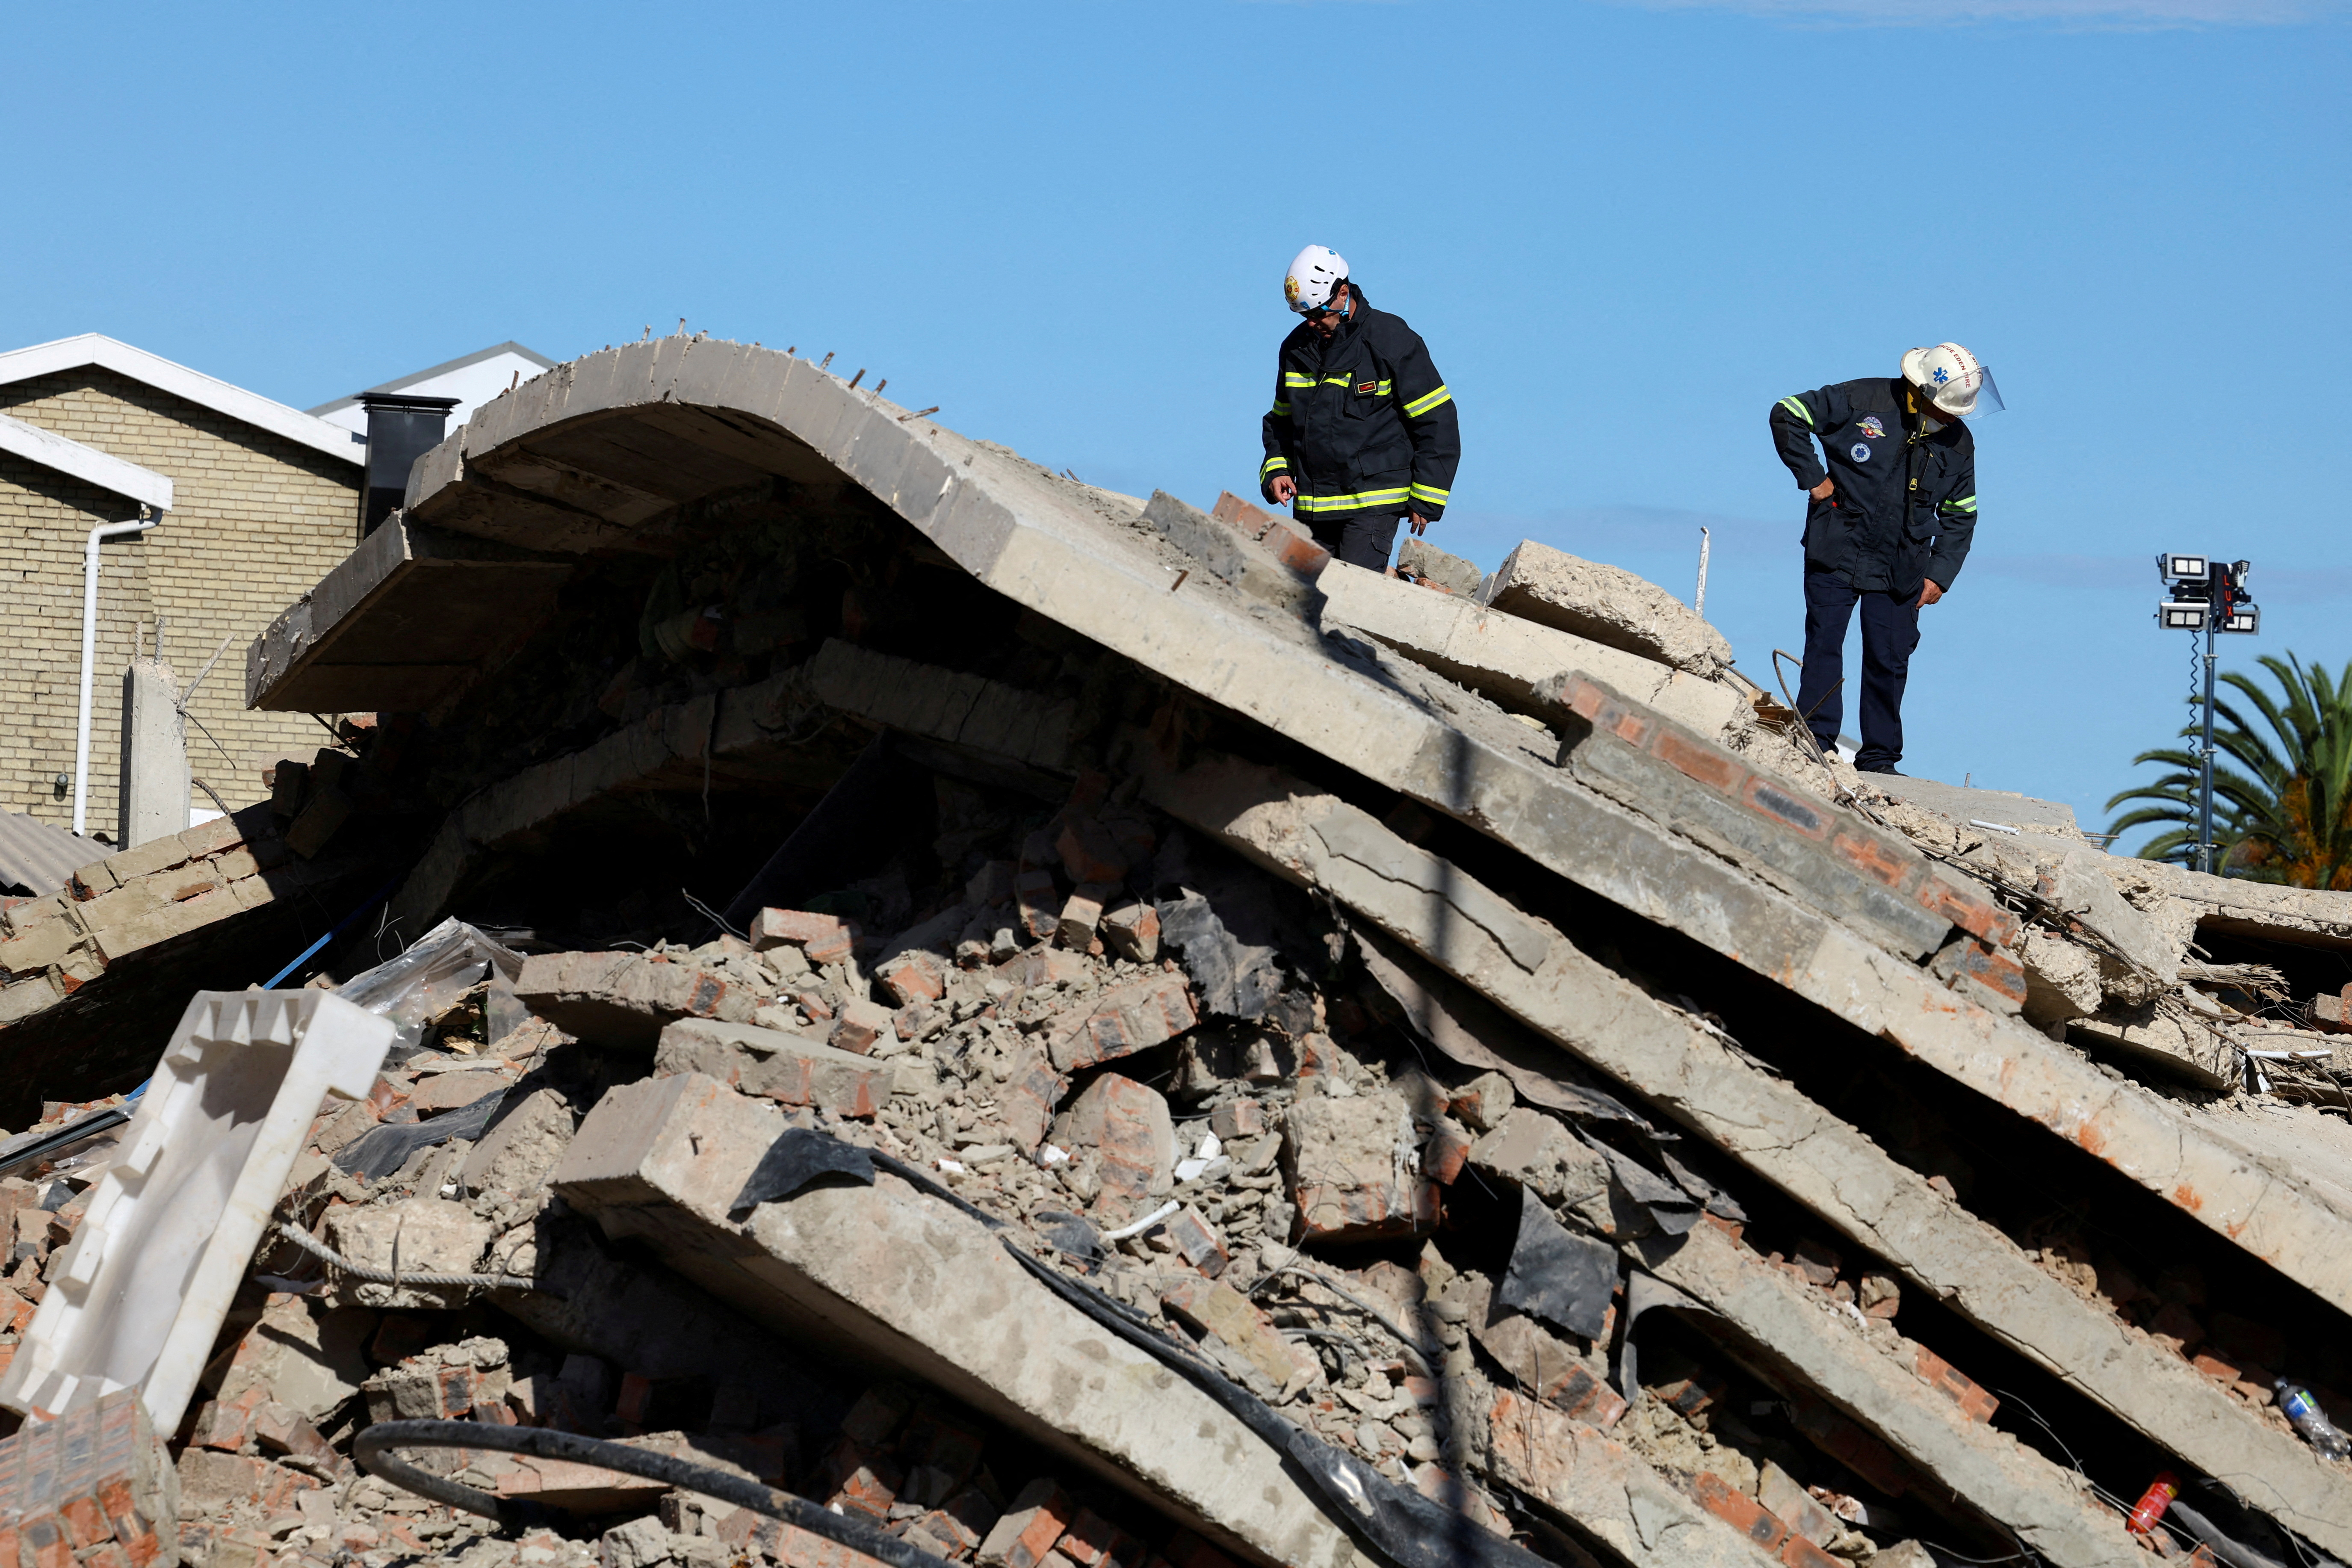 Rescuers work to rescue construction workers trapped under a building that collapsed in George